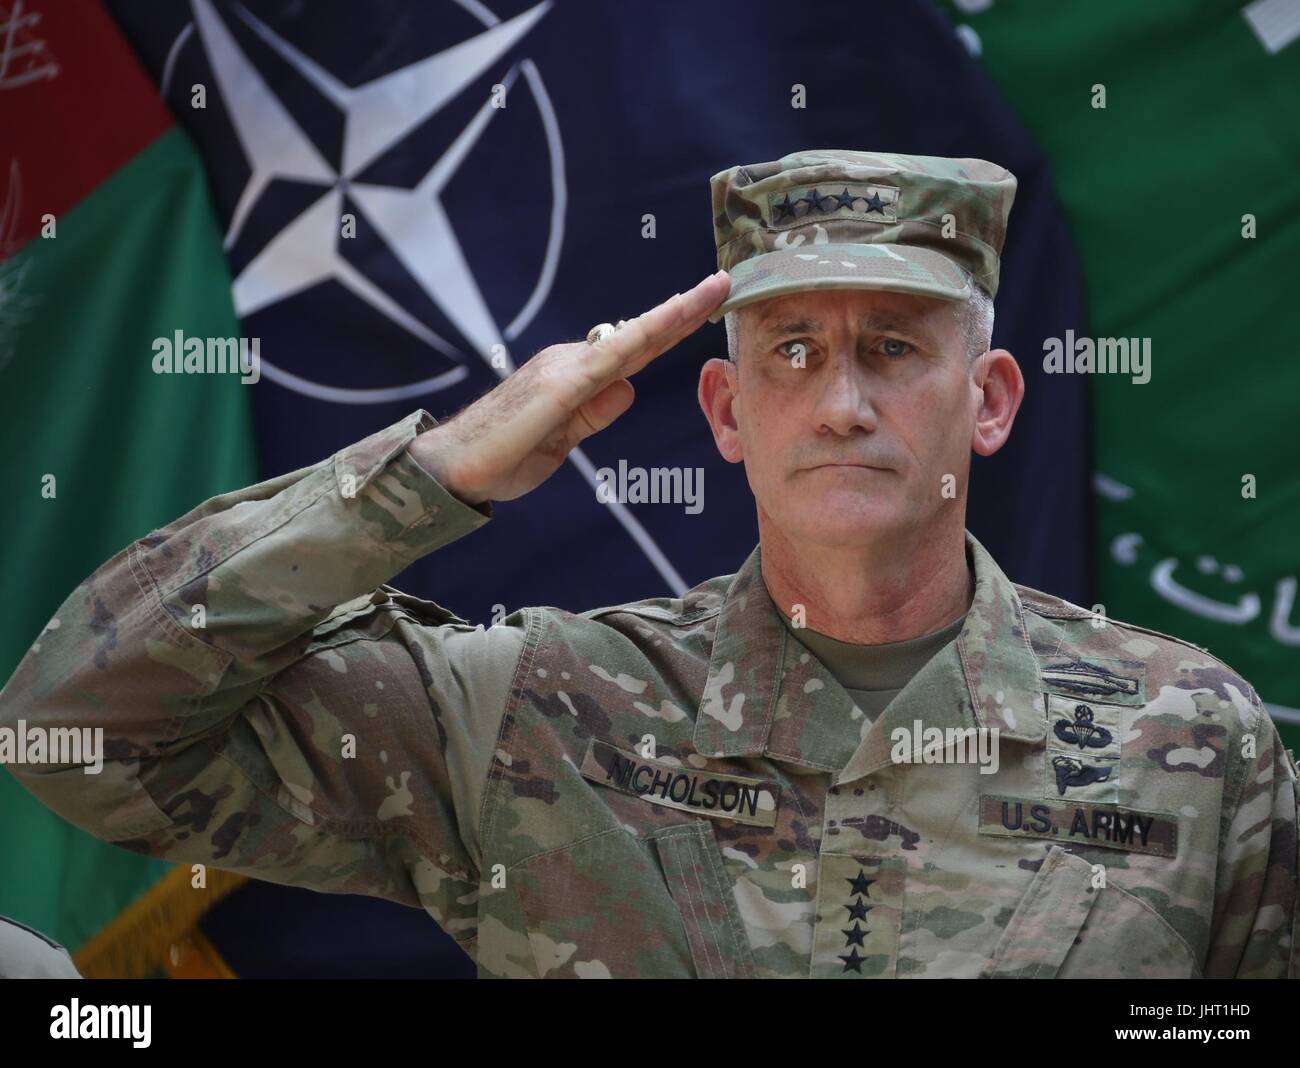 (170715) -- KABUL, July 15 (Xinhua) -- General John Nicholson, the U.S. and NATO commander in Afghanistan, attends a change of command ceremony in Resolute Support headquarter in Kabul, Afghanistan, July 15, 2017. (Xinhua/Rahmat Alizadah)(rh) Stock Photo